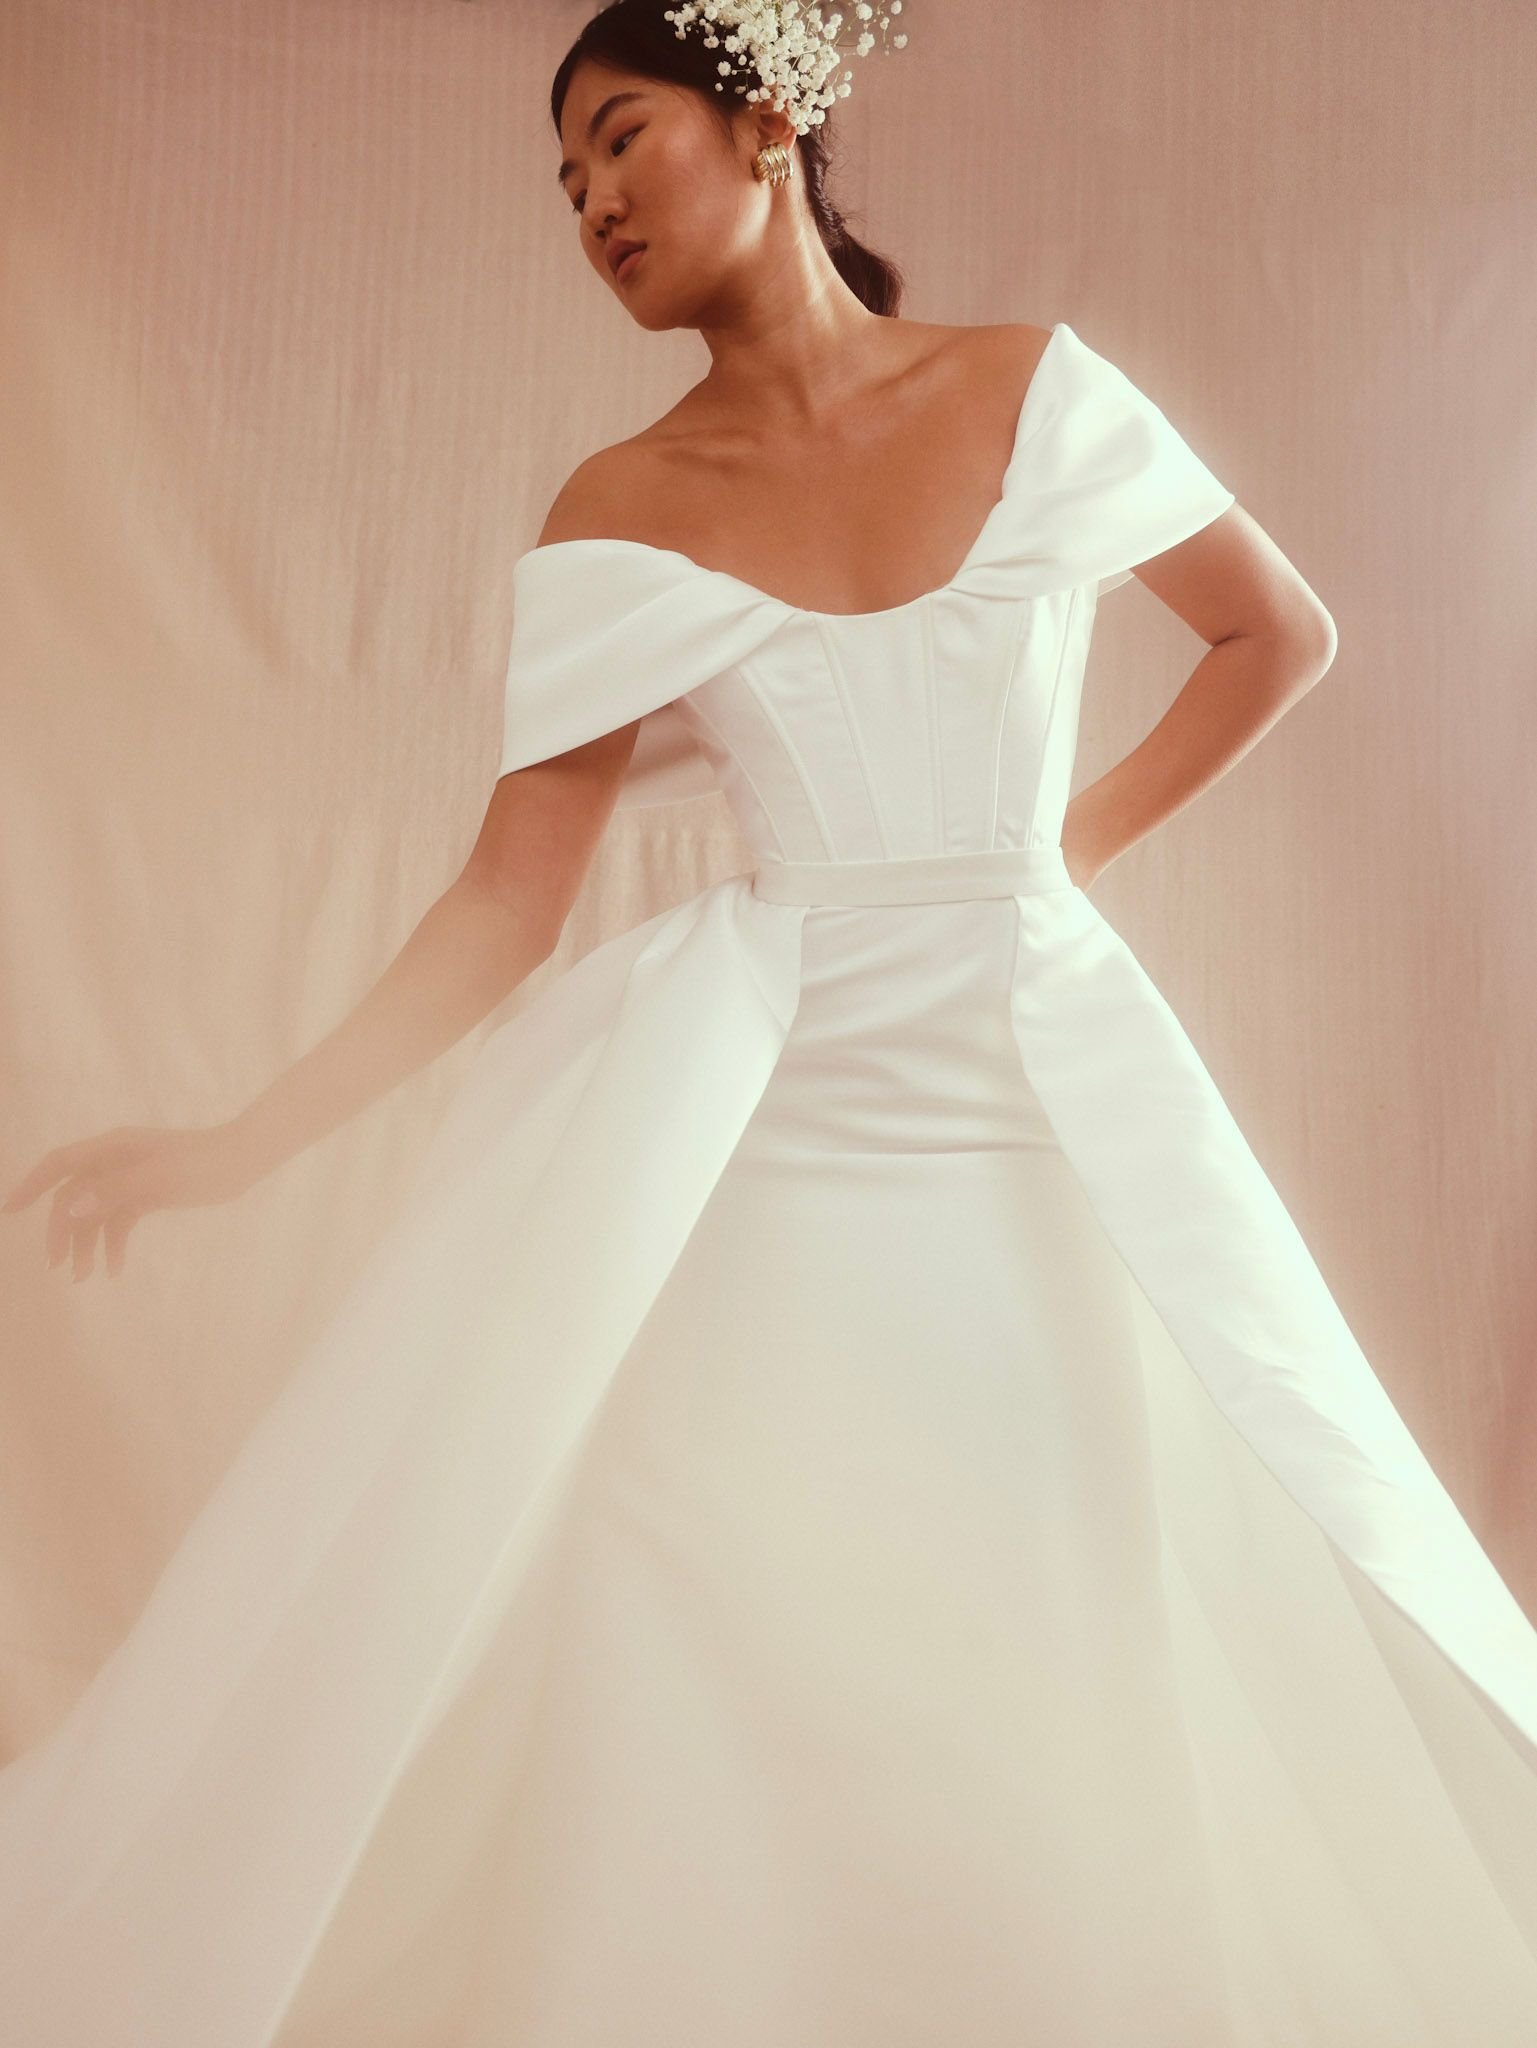 blanc-de-blanc-bridal-boutique-pittsburgh-cleveland-dress-wedding-gown-house-of-renhue-anderson-overskirt.jpeg